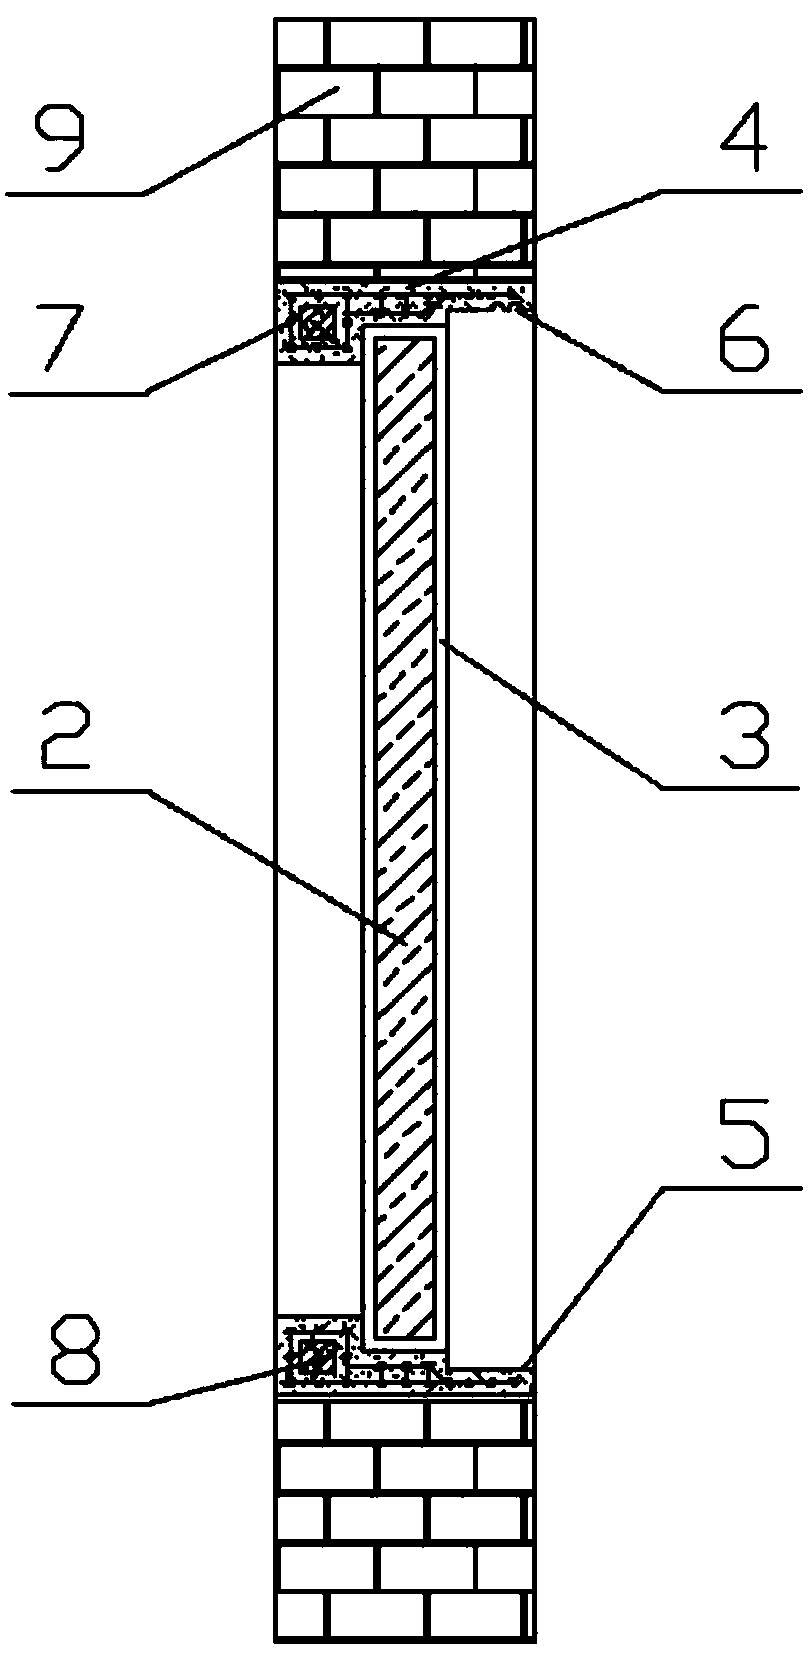 Assembly-type multifunctional prefabricated external window standard sleeve and installation method